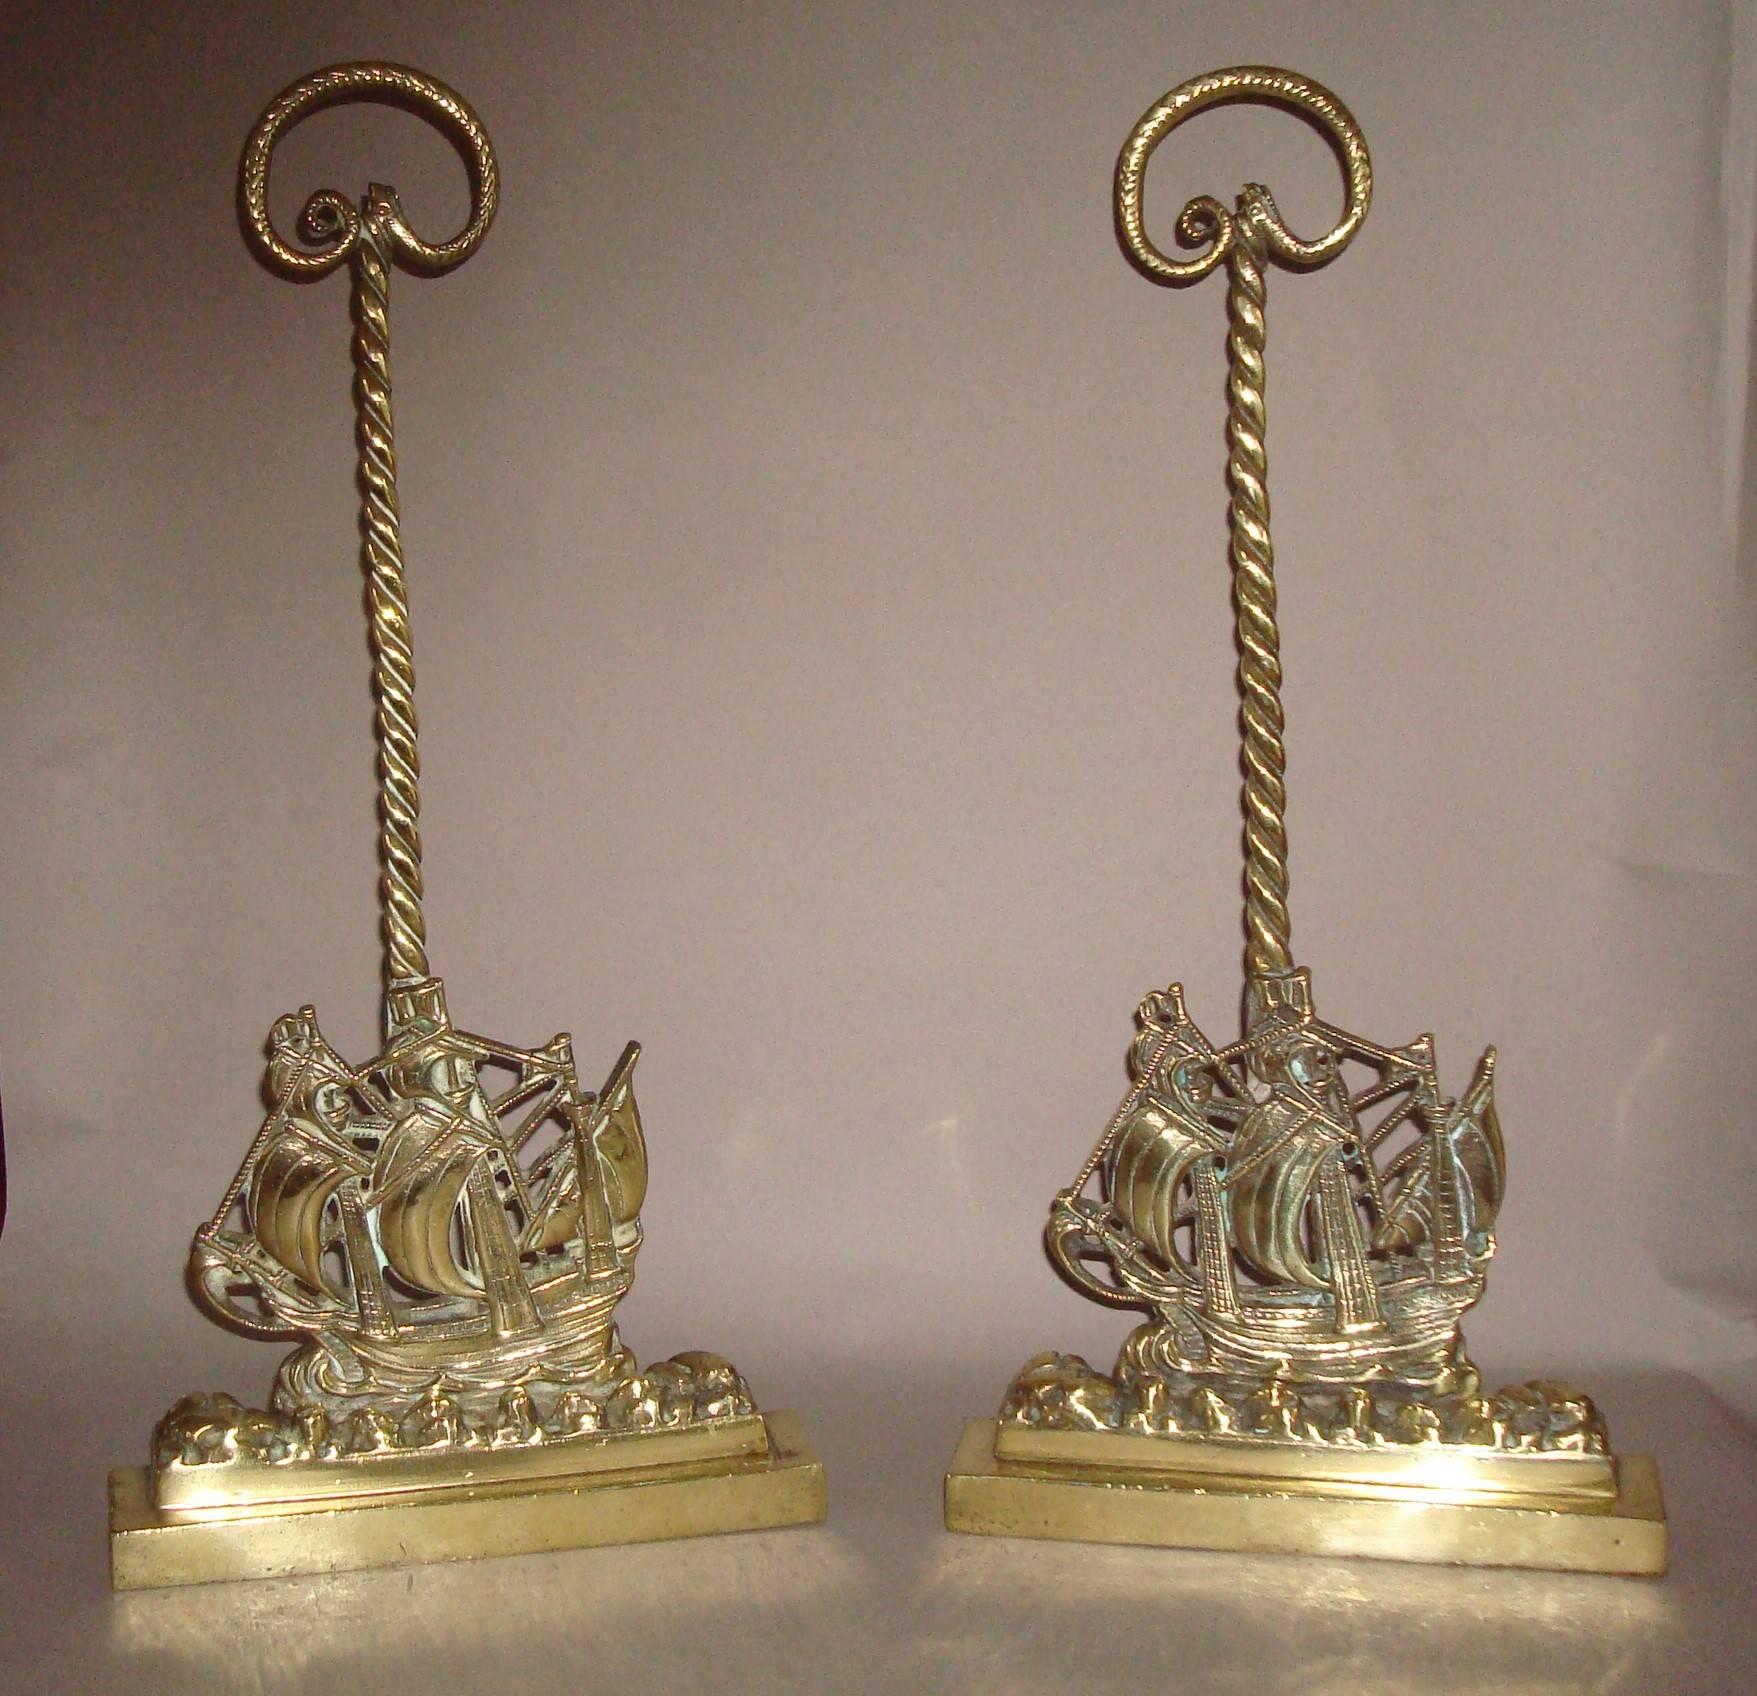 An interesting 19th century pair of brass doorstops or door porters of 'The Mayflower', the scroll handle being a serpent on a rope twist shaft, raised on 'The 'Mayflower' ship in full sail on a choppy sea, with a plinth base concealing its original